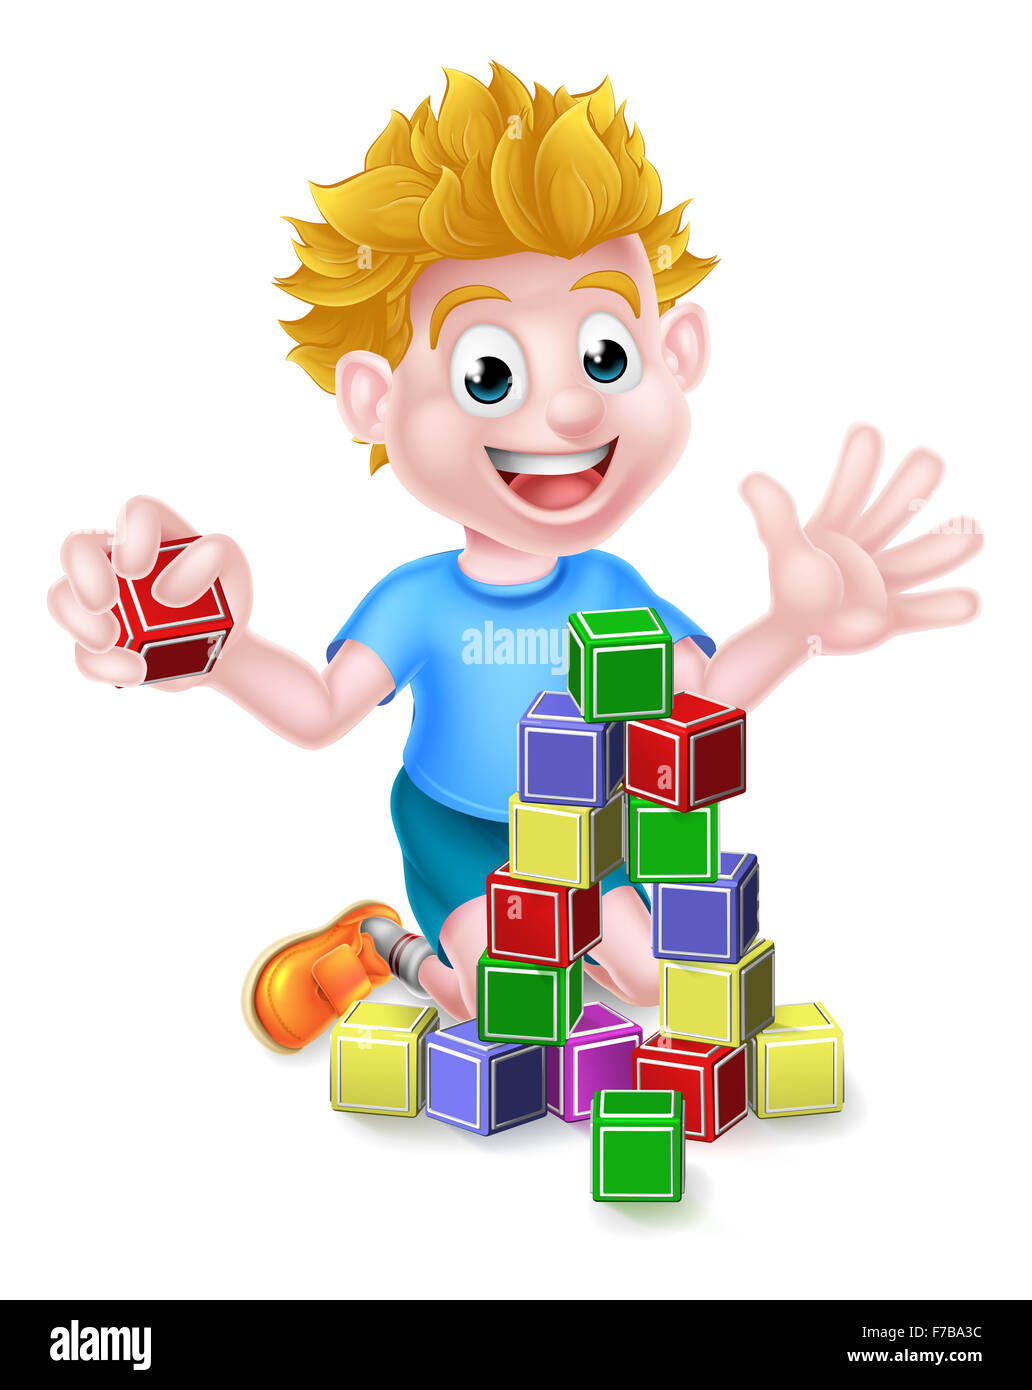 A happy cartoon boy child kid playing with building or learning blocks Stock Photo